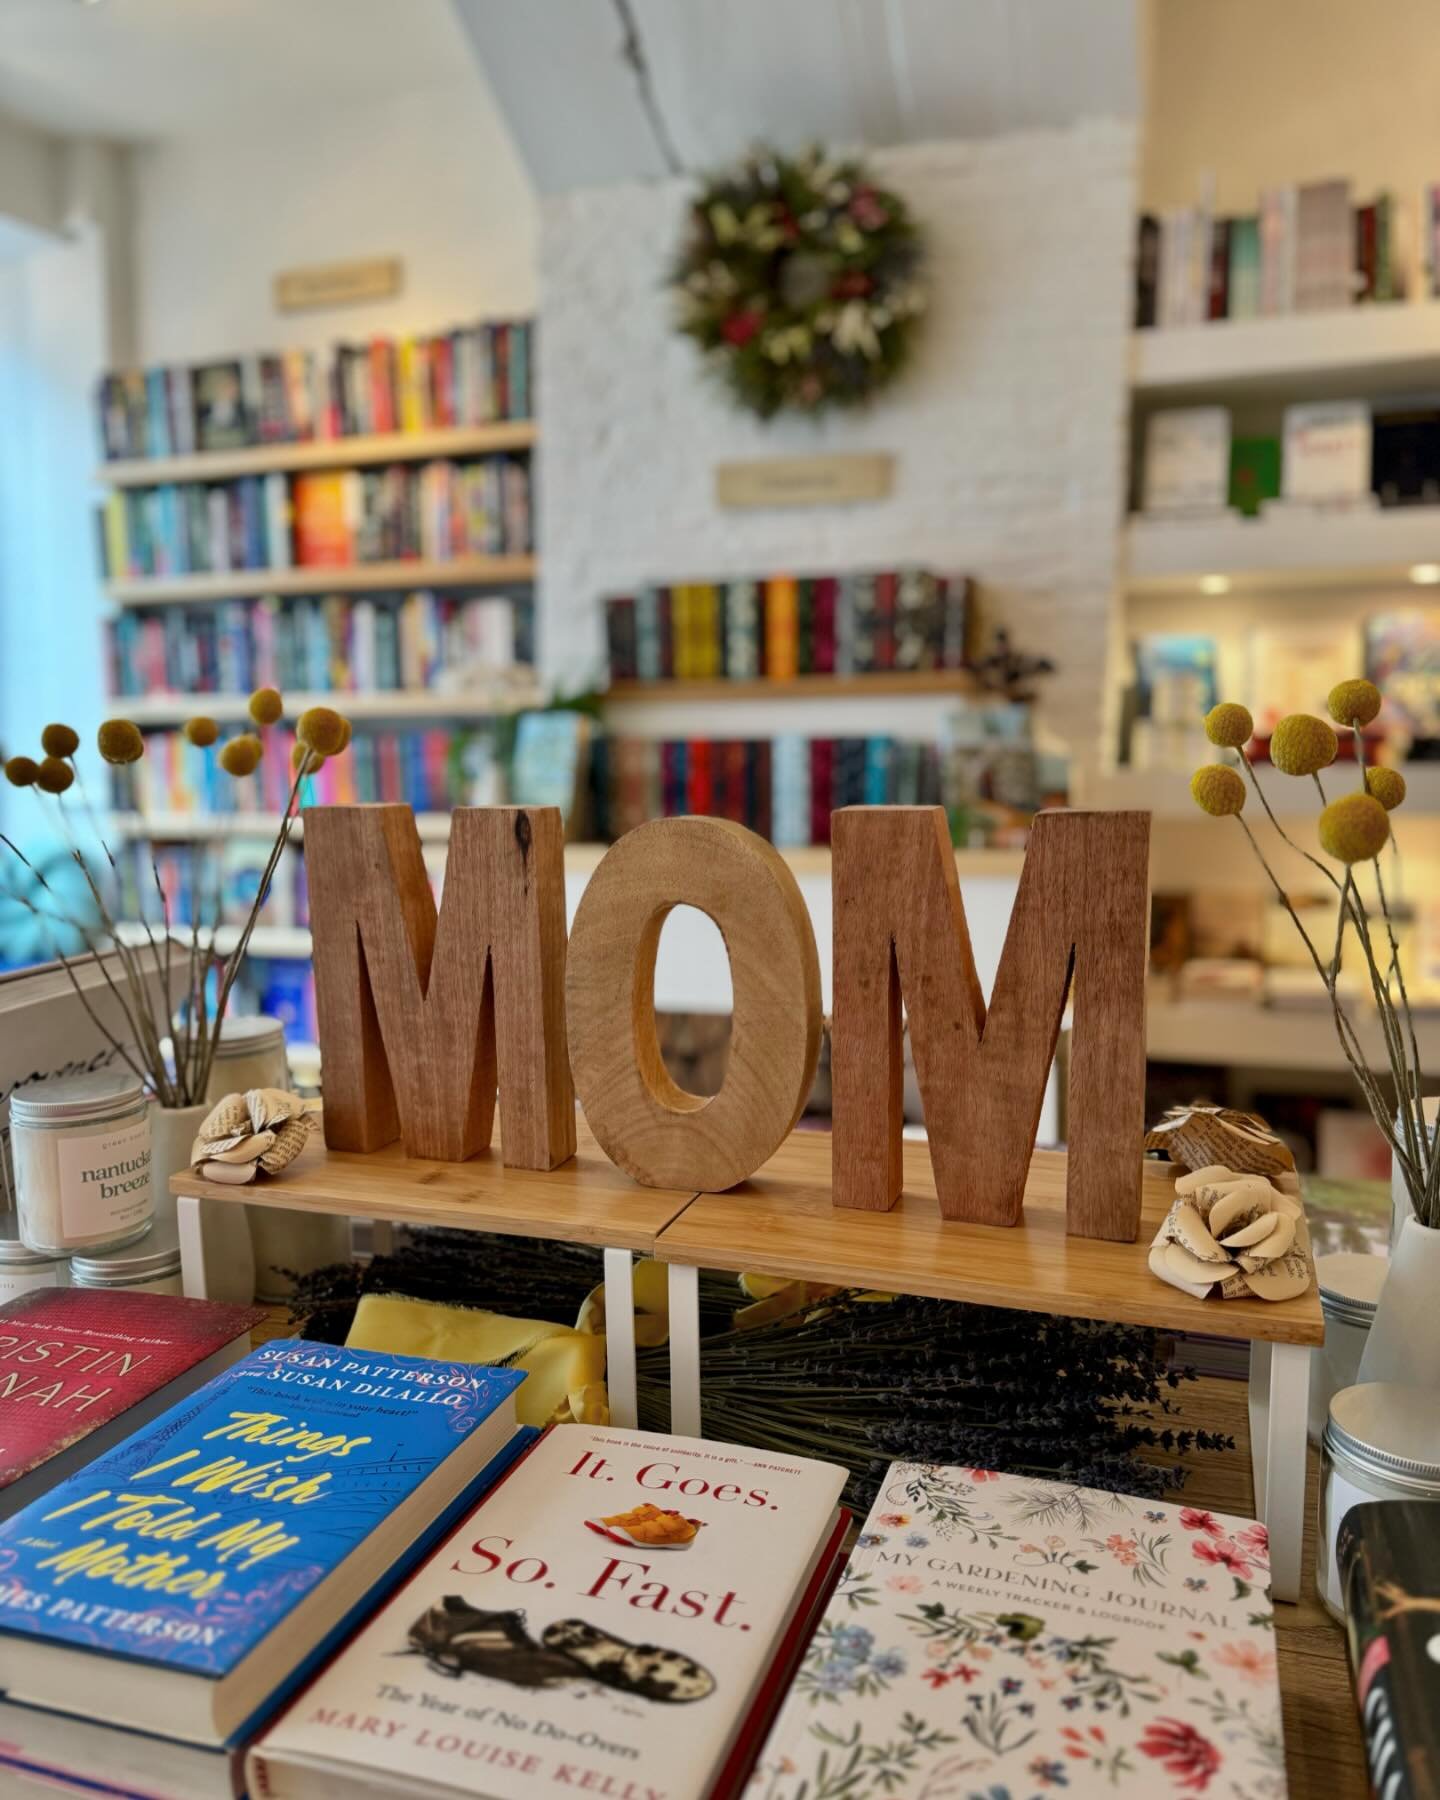 Mother&rsquo;s Day picks! 💖

Sharing some of our favorite books we know Mom will love! Swipe through for beautiful stacks that include:
✨gardening
✨fiction
✨cooking
✨non-fiction

Complementary gift wrap as always! 
Open 10-5 everyday 📚

.
.
.
.
.
.